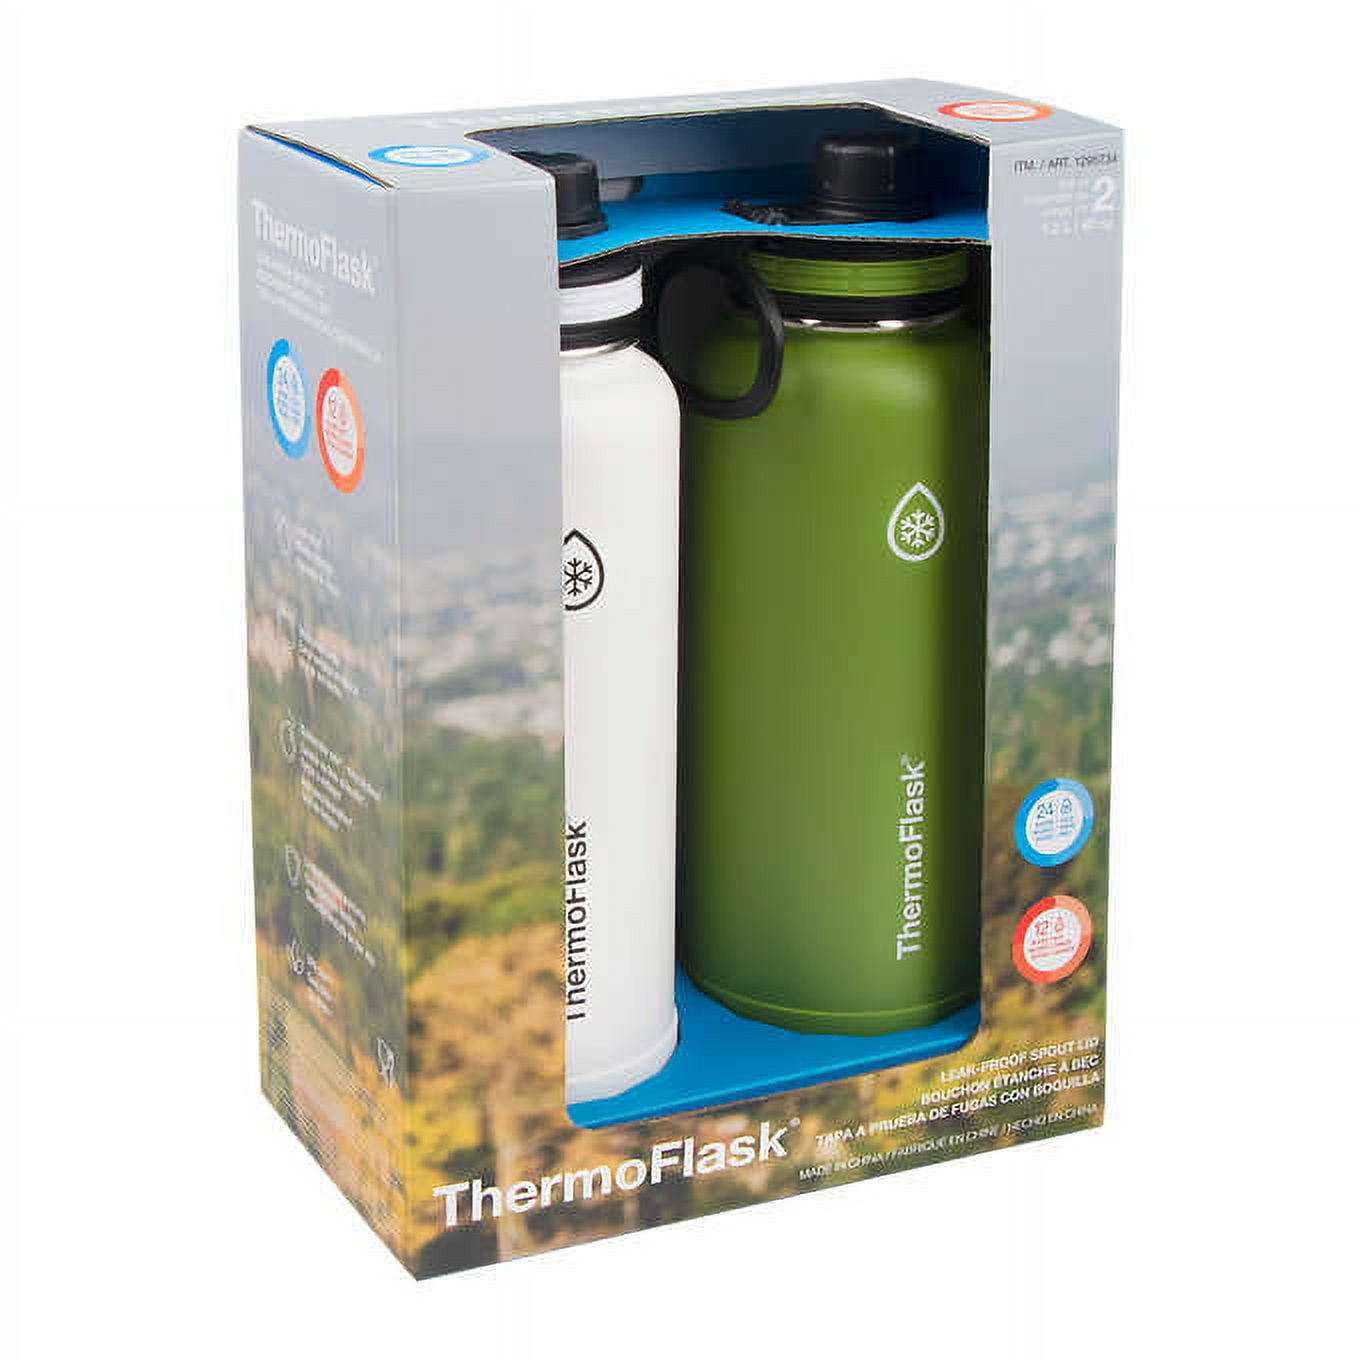 Thermoflask Insulated 40 oz. Stainless Steel Water Bottle with